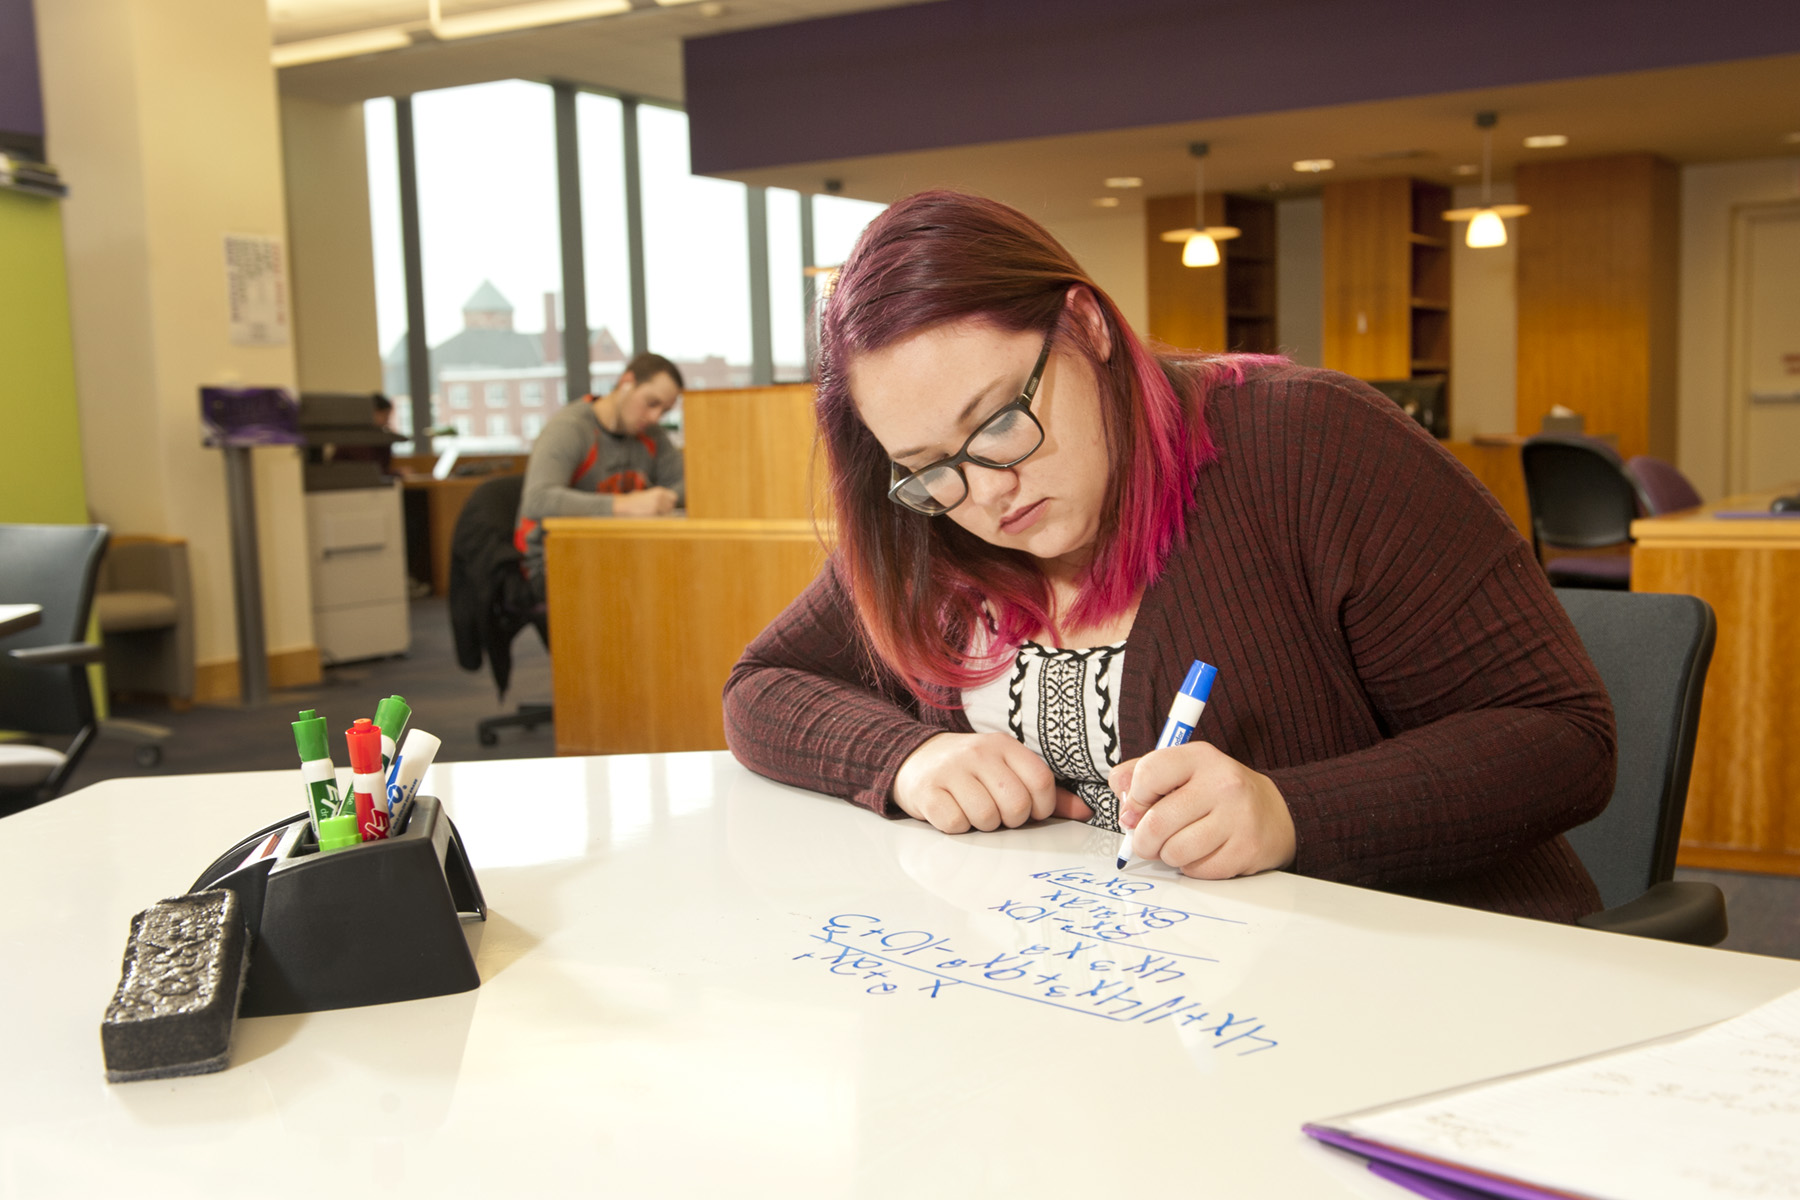 Mount Union student studying in the library 